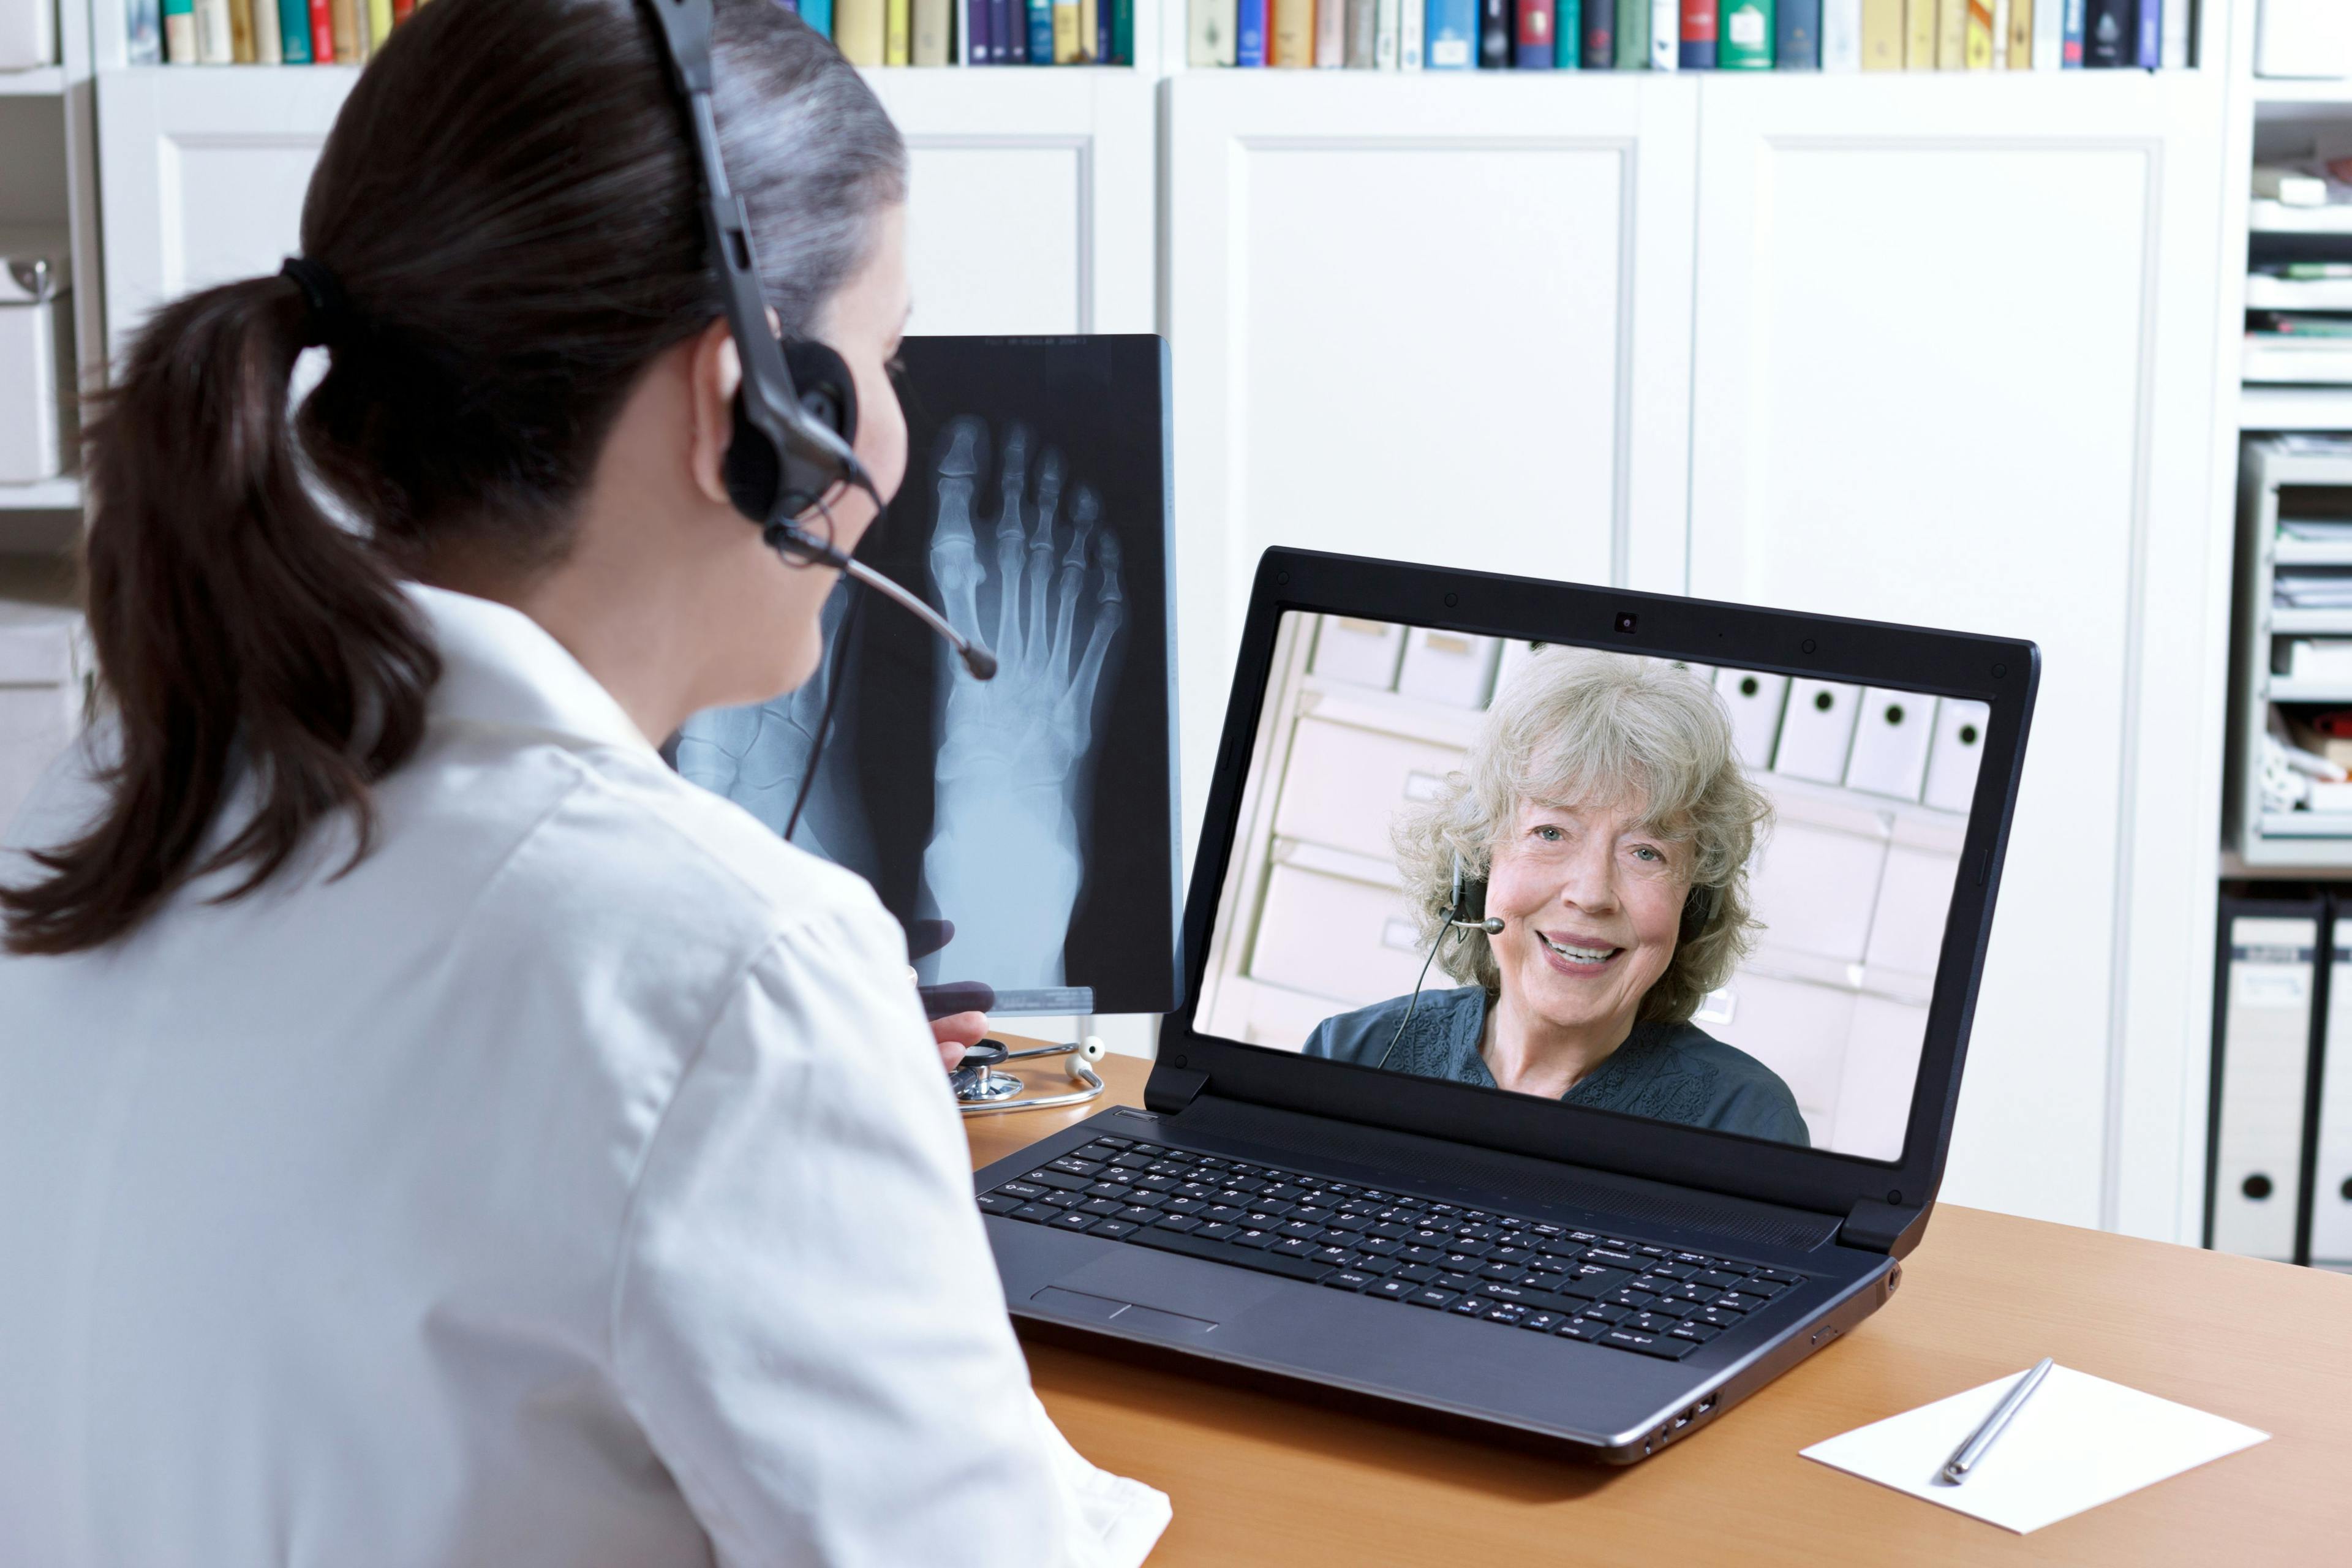 Employer Health Centers Expand Virtual Care Services Amid Pandemic